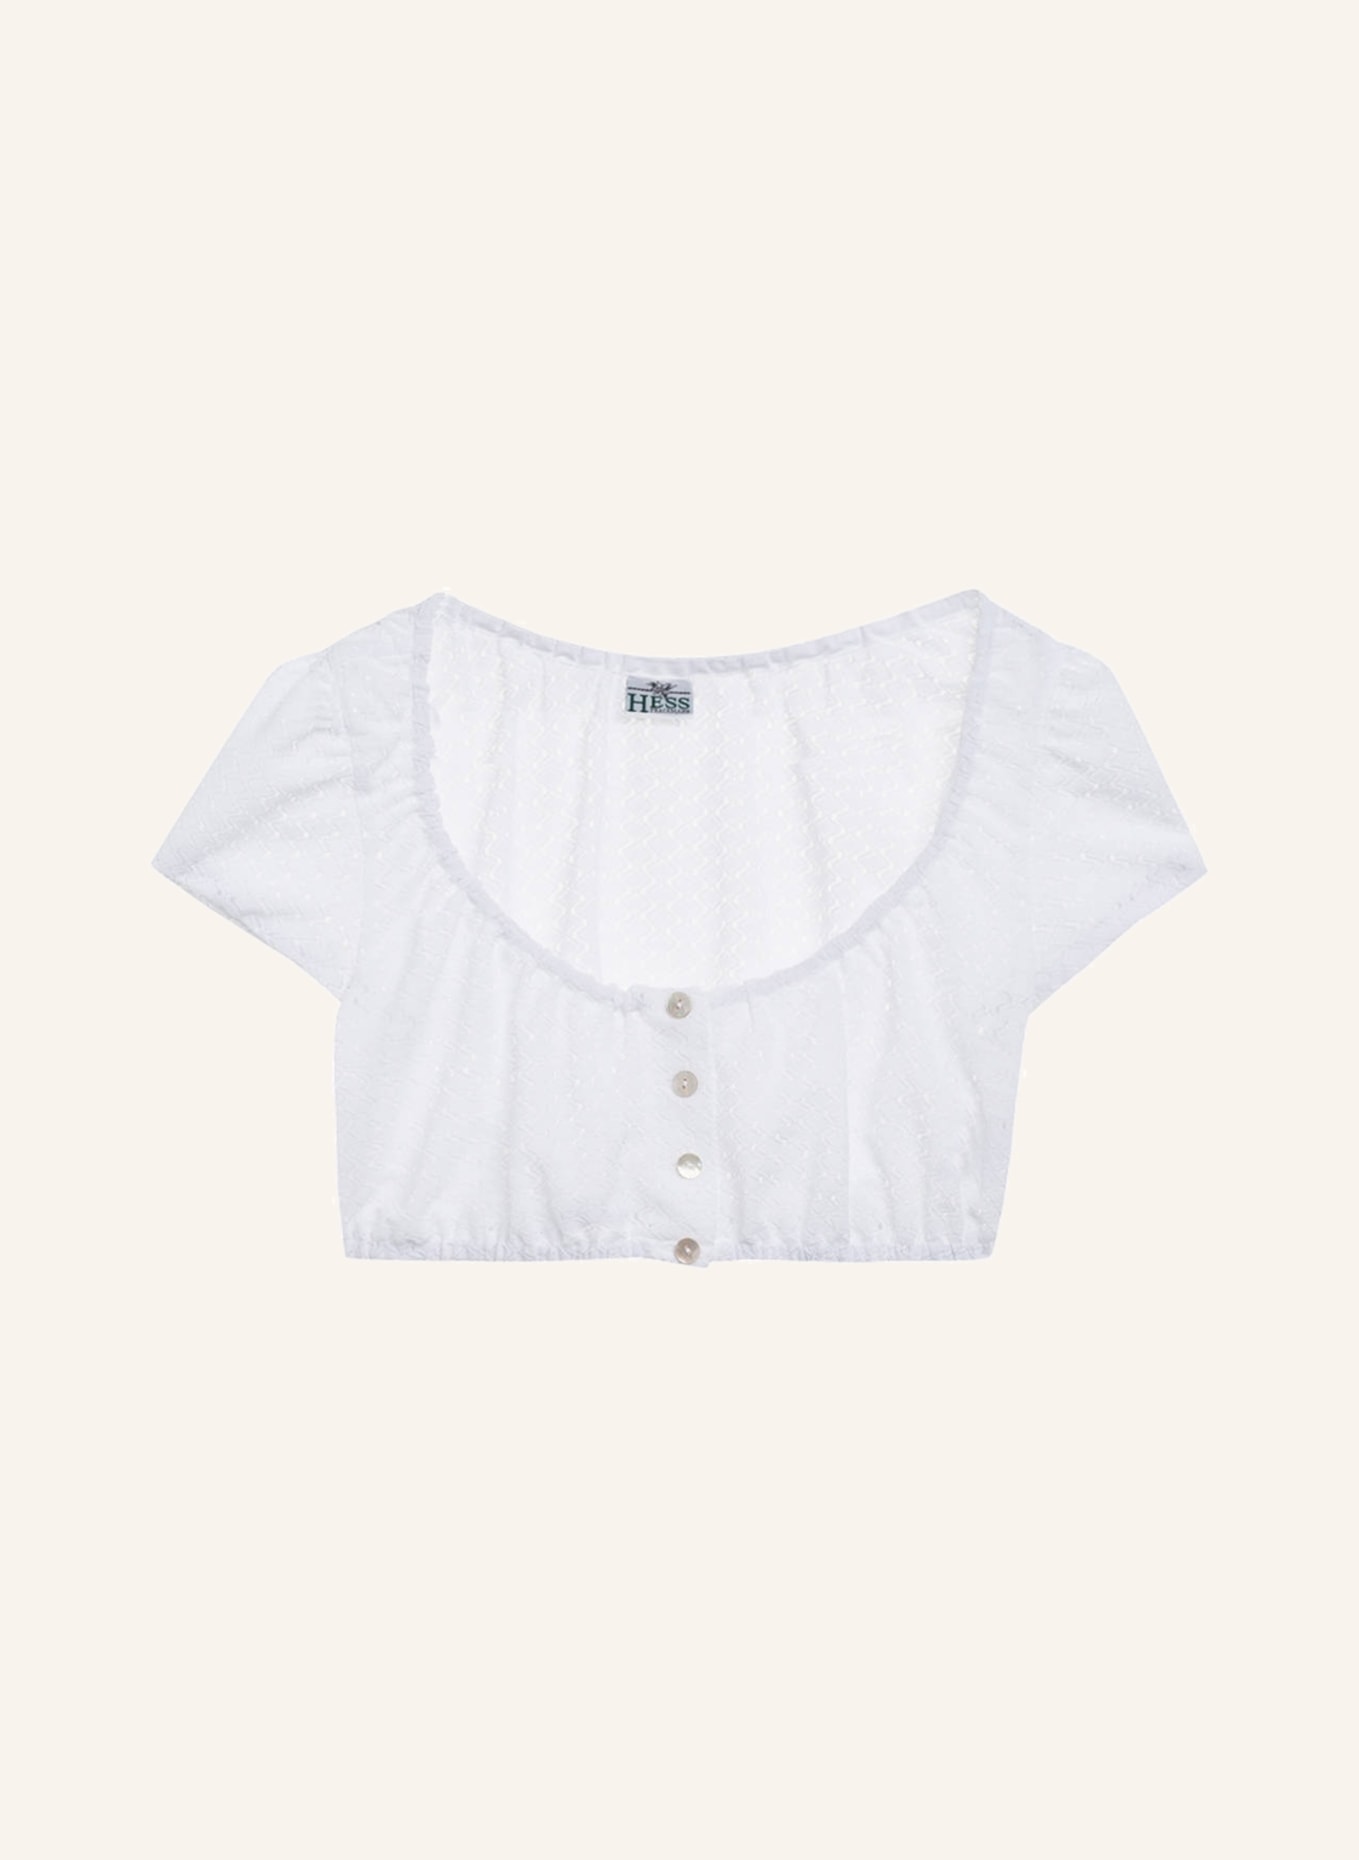 BERWIN & WOLFF Dirndl blouse with linen, Color: WHITE (Image 1)